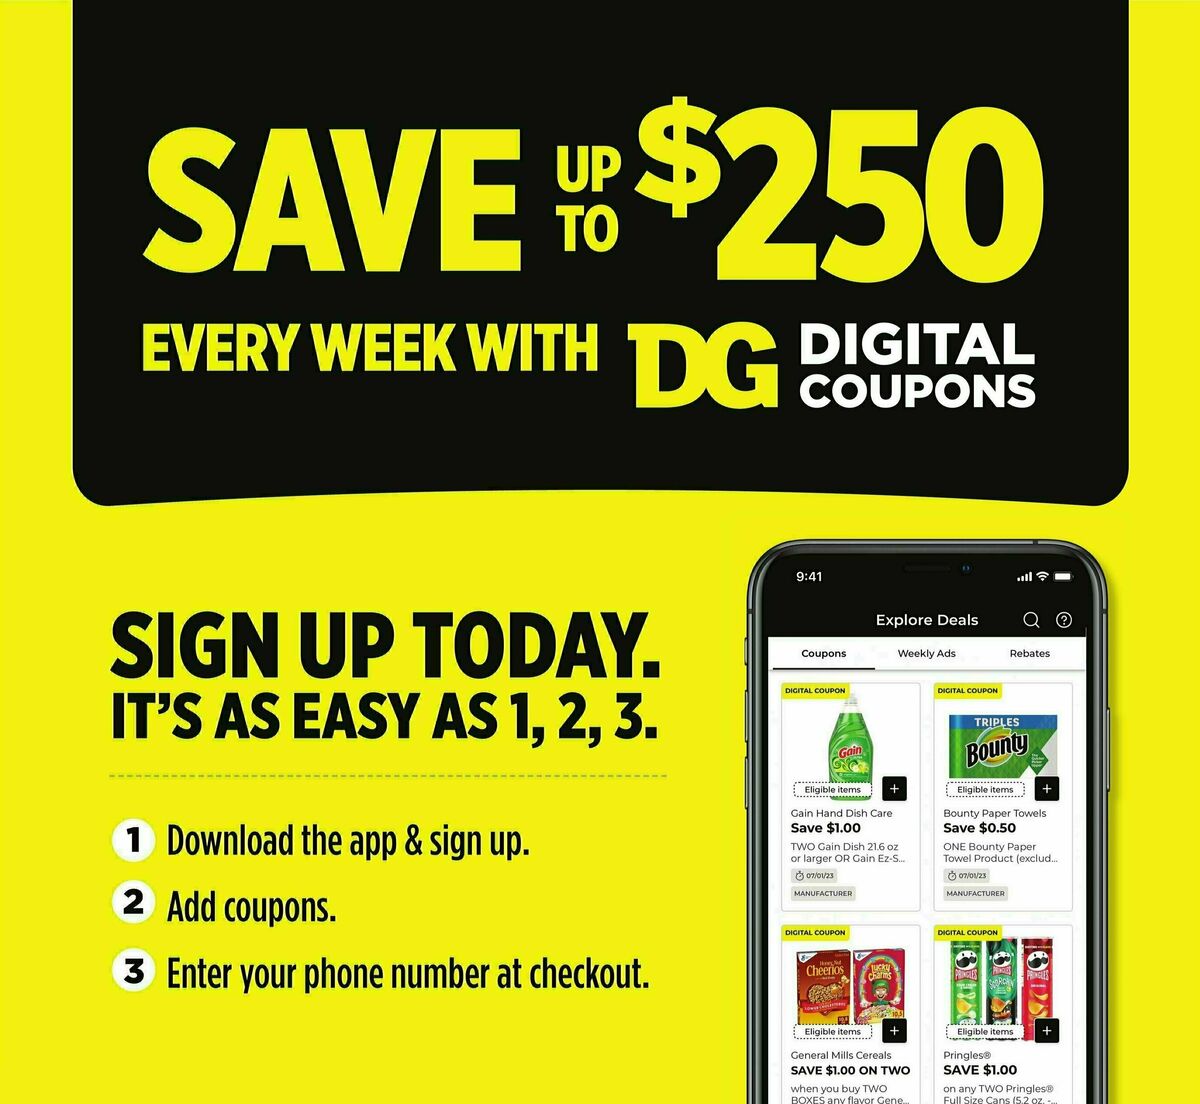 Dollar General Weekly Ad from August 6